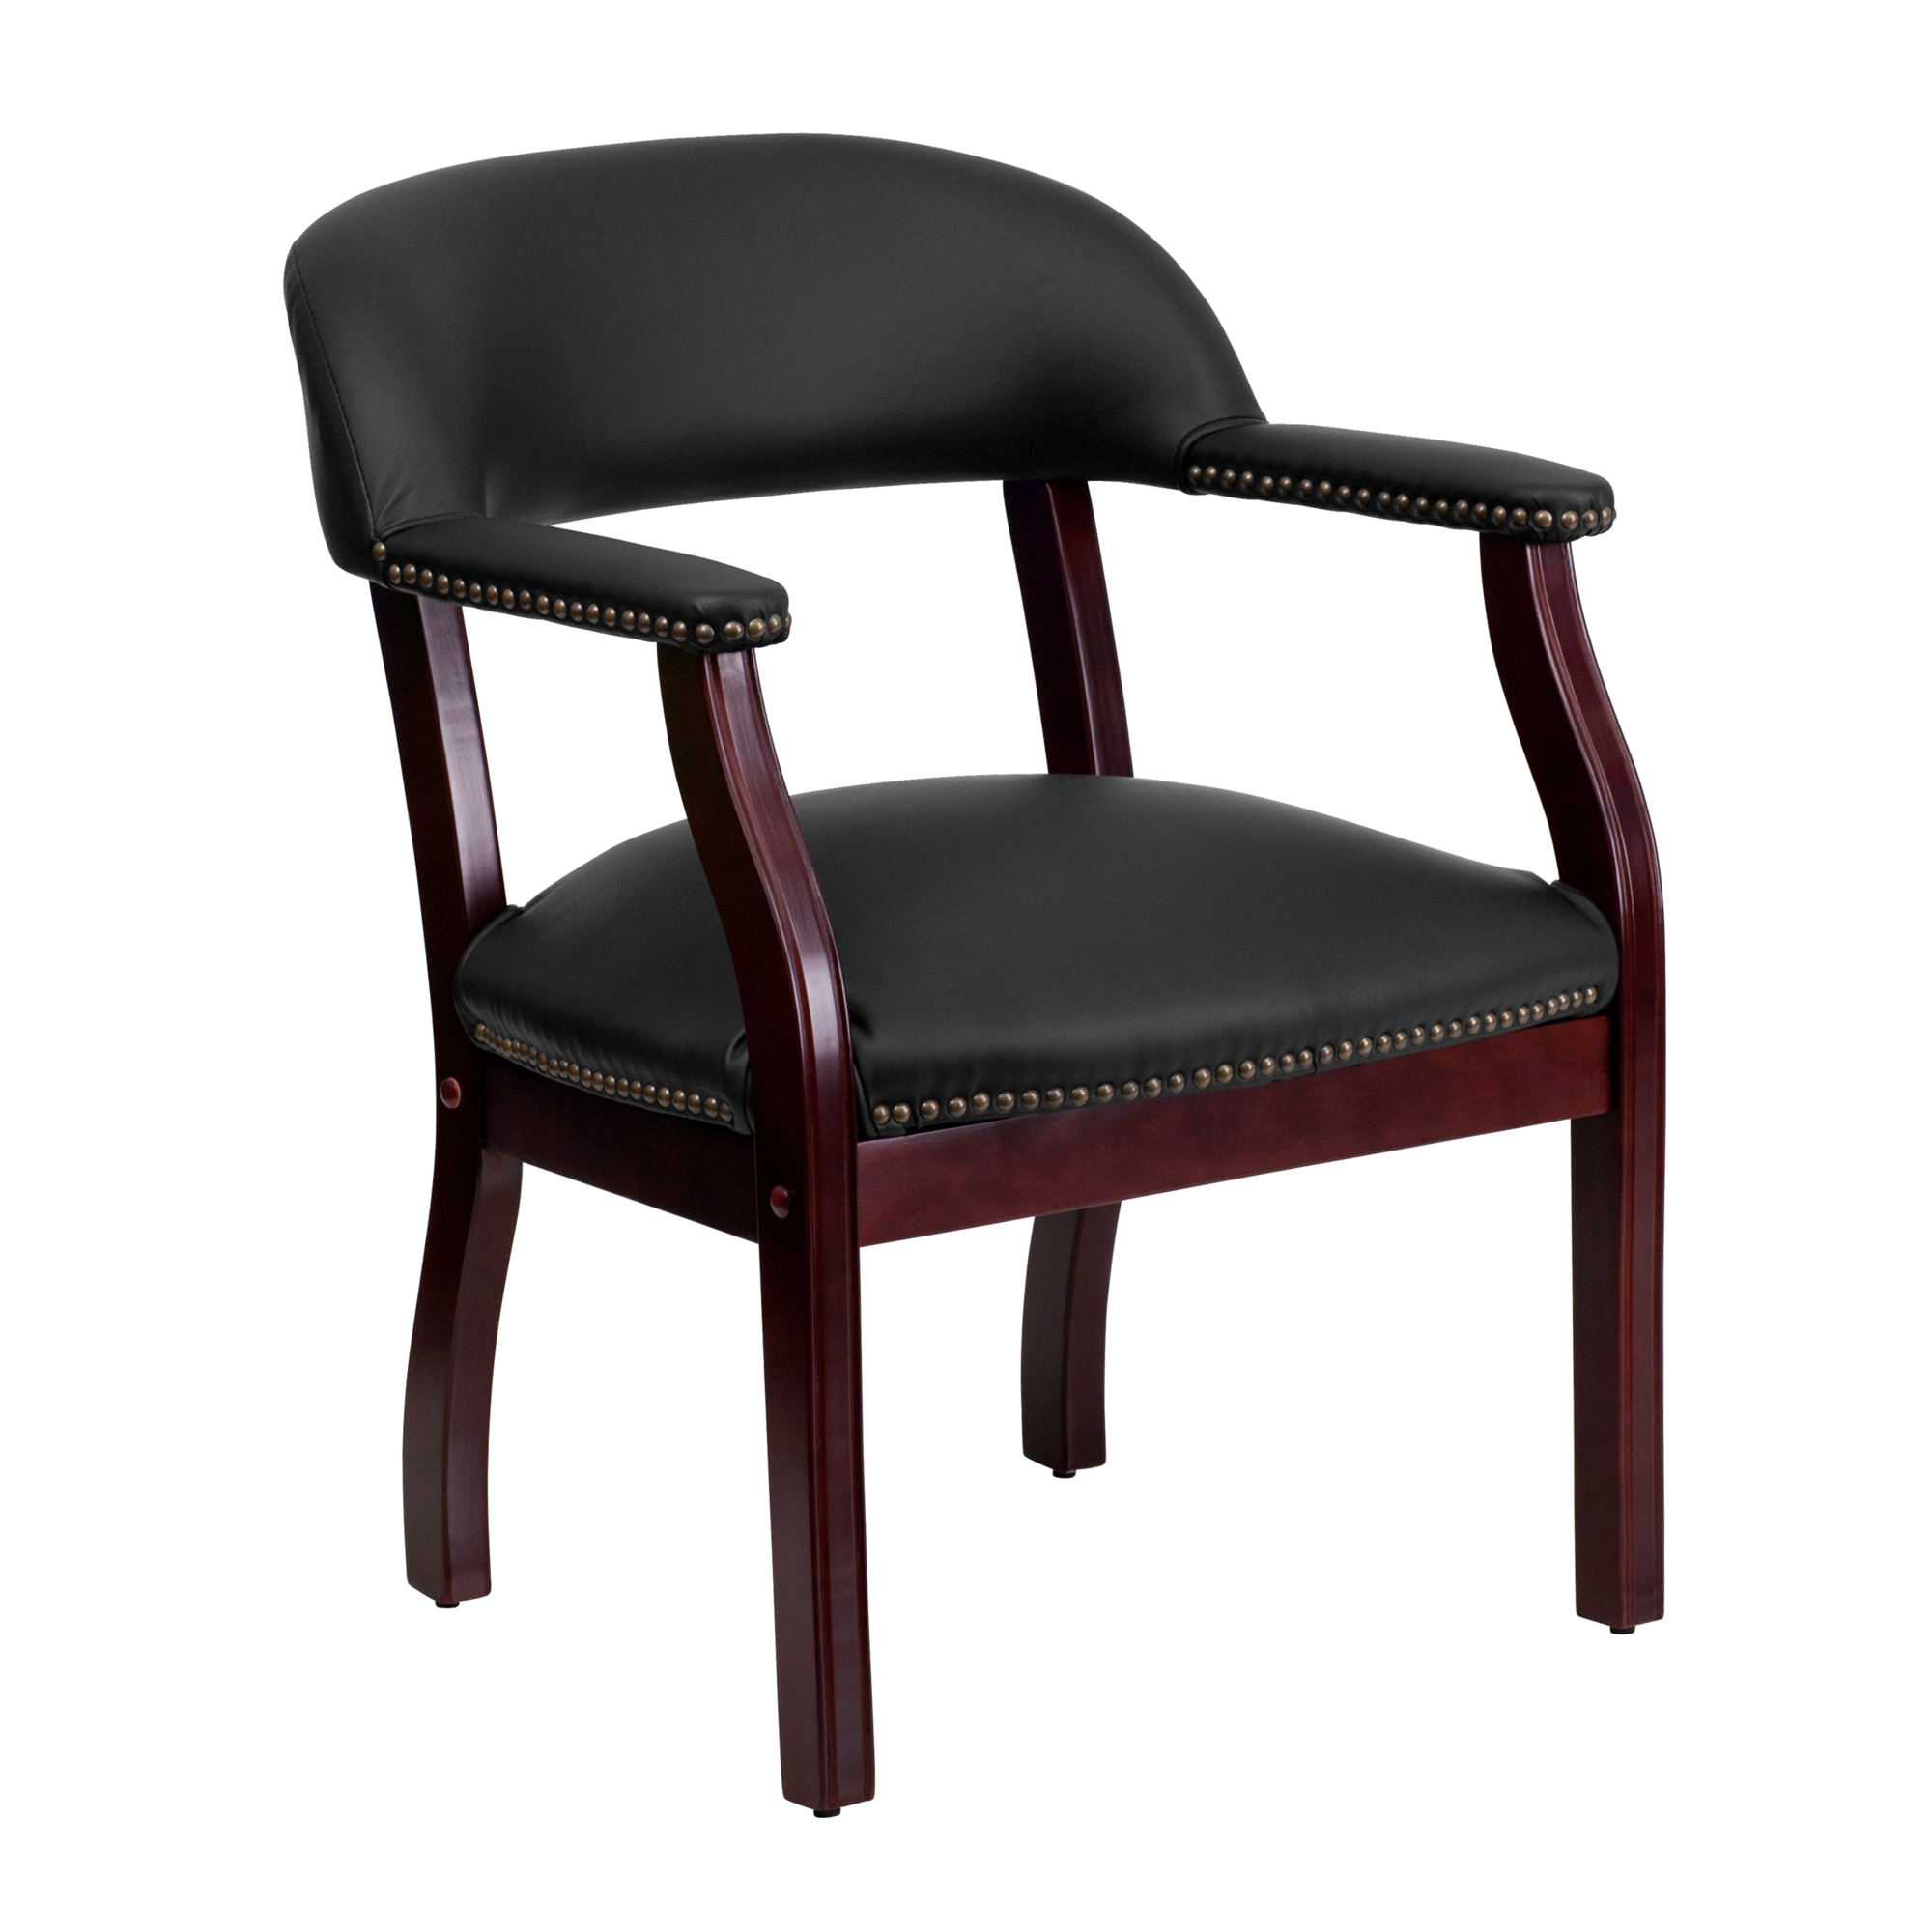 Flash Furniture, Black LeatherSoft Chair with Accent Nail Trim, Primary Color Black, Included (qty.) 1, Model BZ105LFBKLEA